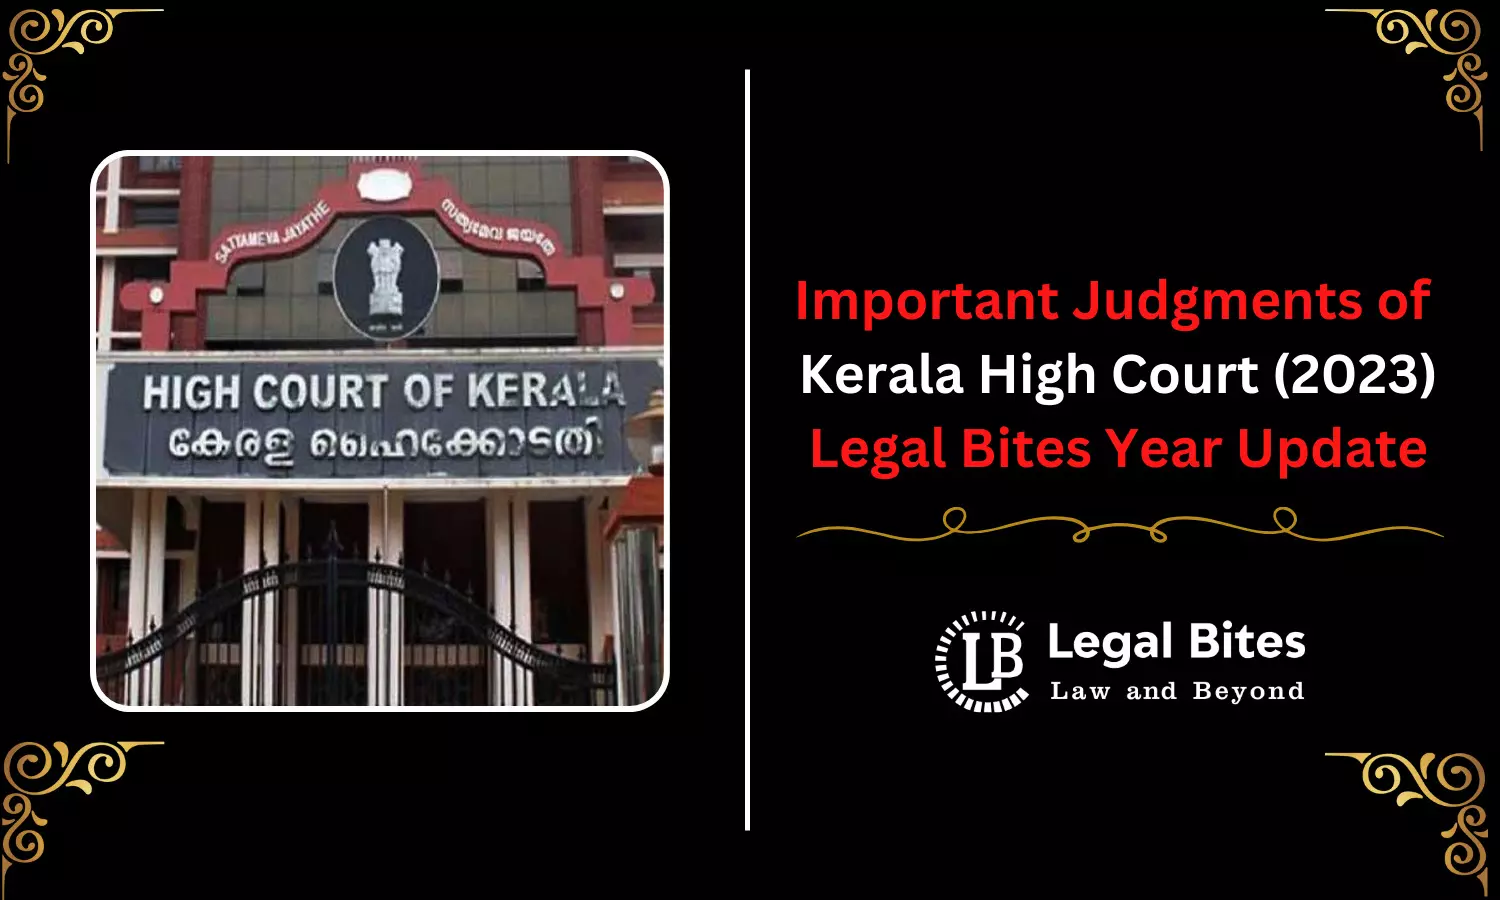 Important Judgments of Kerala High Court (2023) - Legal Bites Year Update